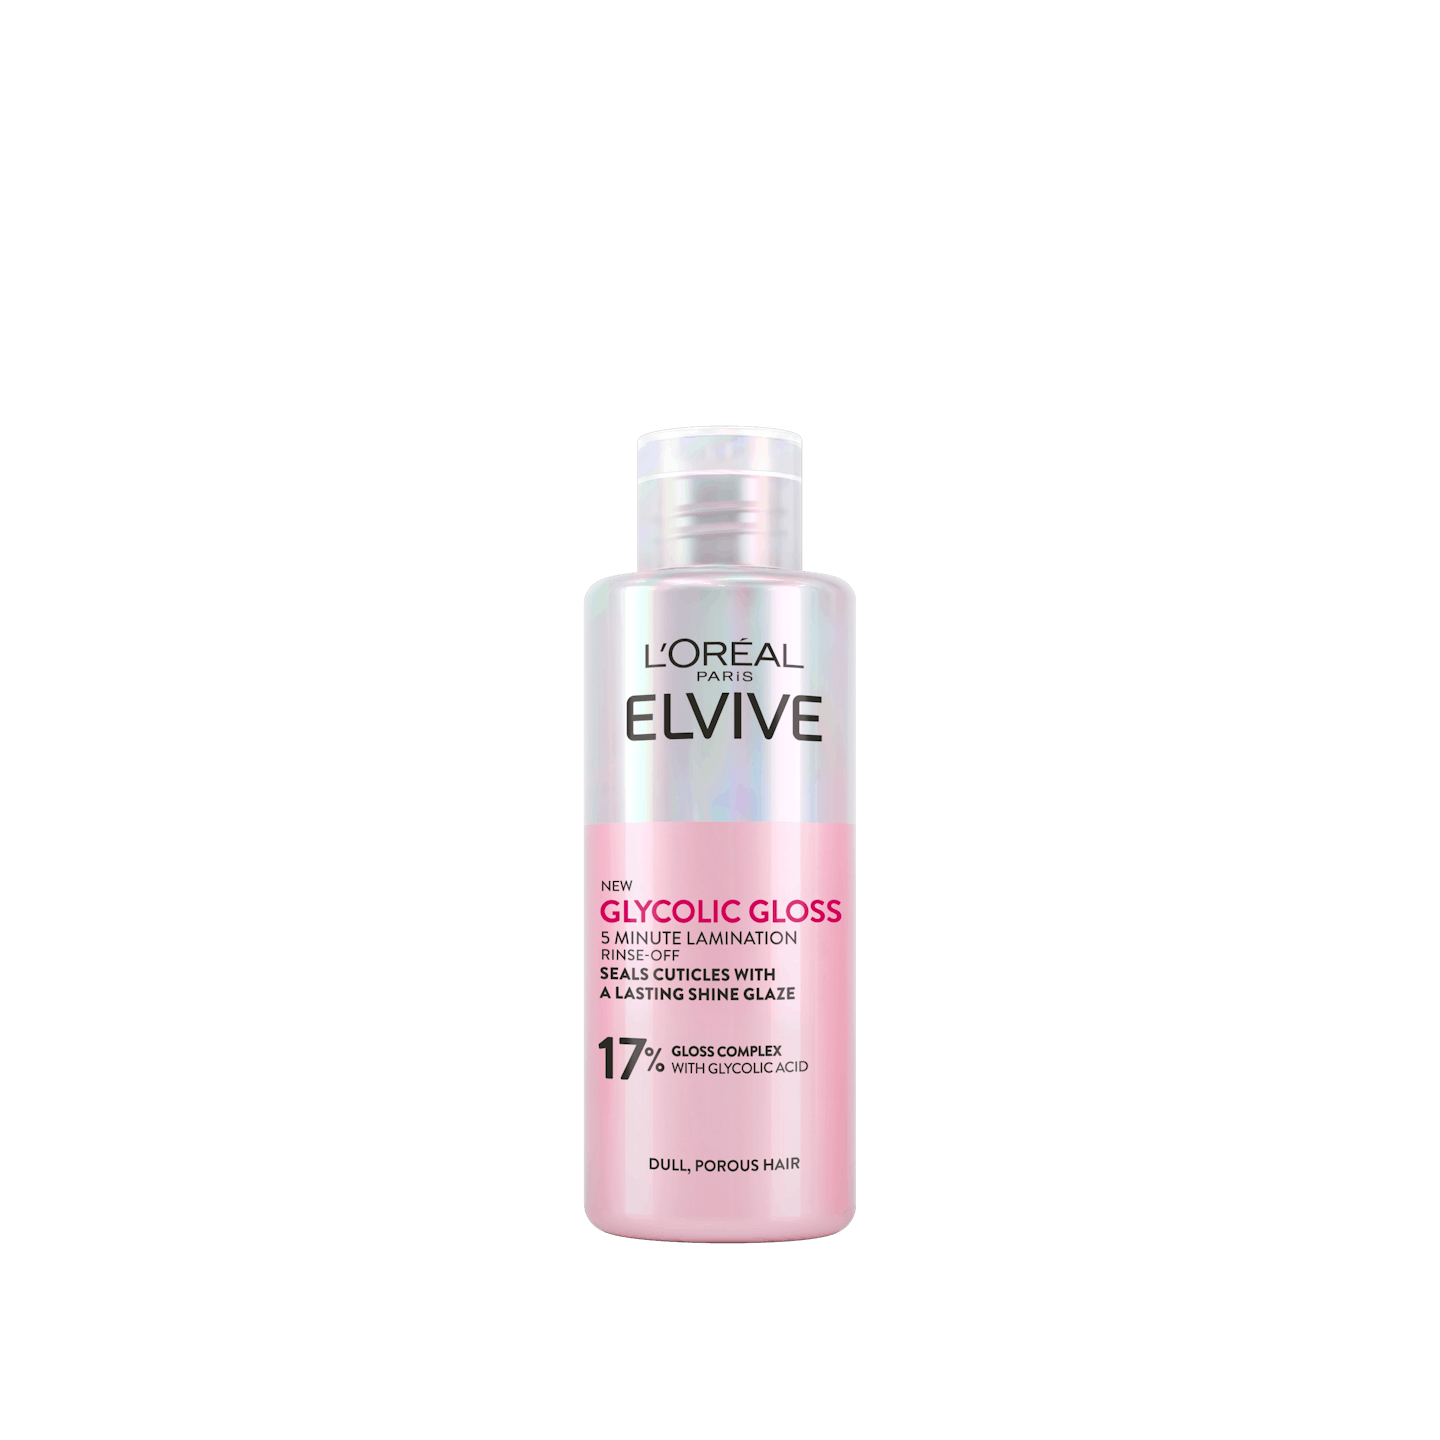 L’Oreal Elvive Glycolic Gloss 5 Minute Lamination Treatment for Dull Hair